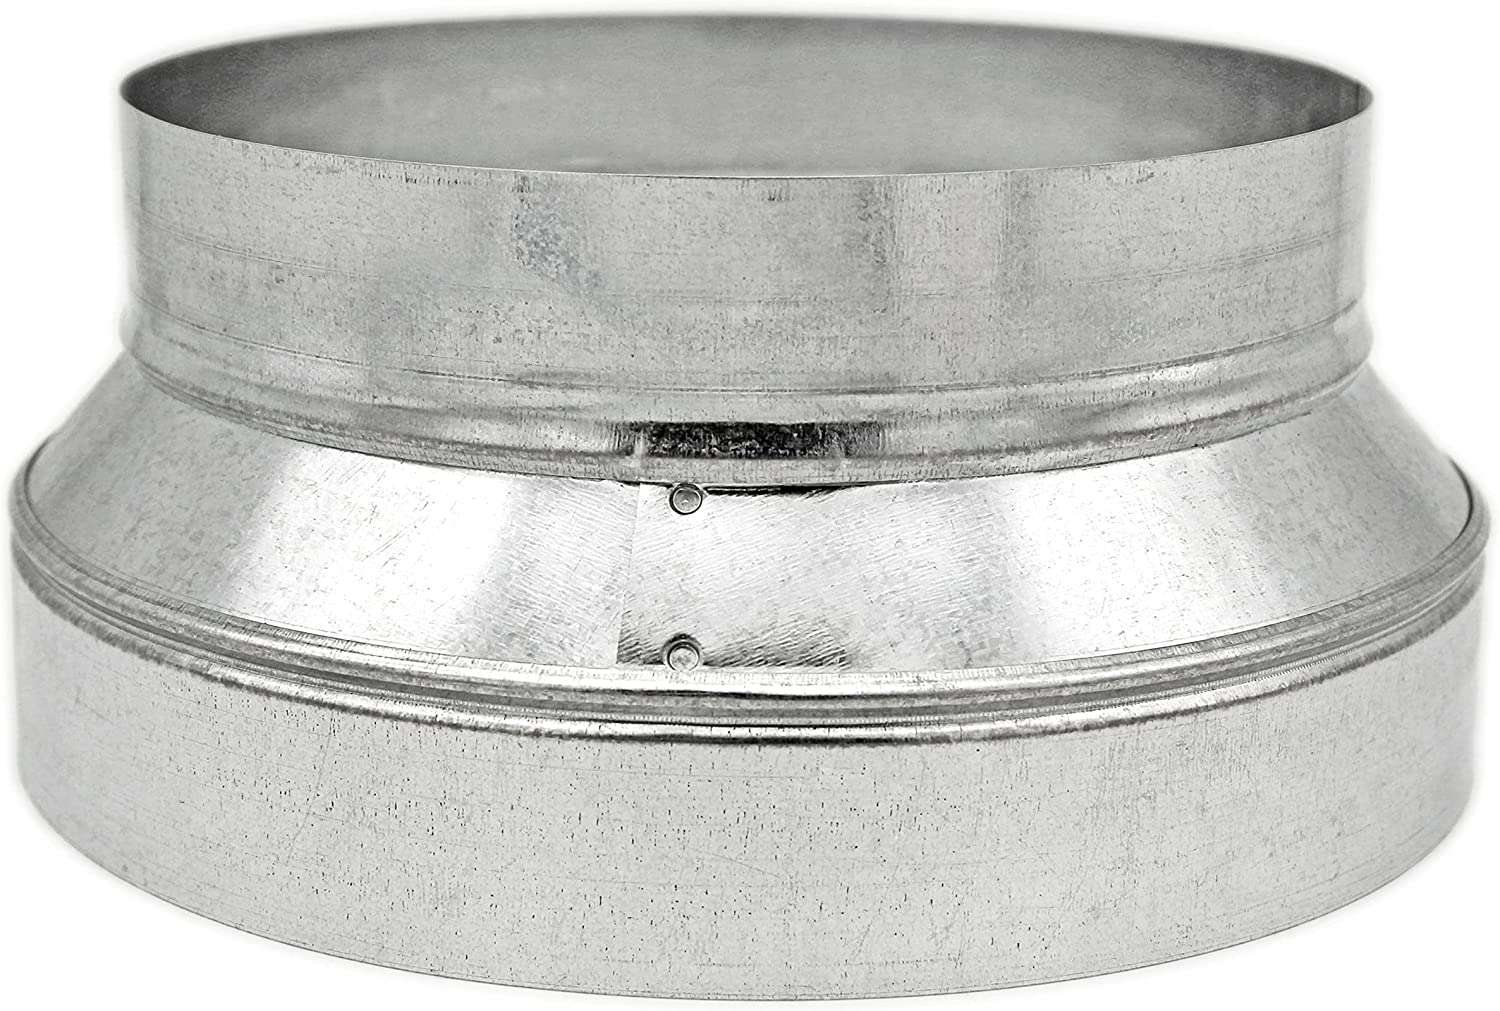 HVAC Premium Round Metal Pipe Reducer & Increaser | 10" to 7" HVAC Duct Reducer or Increaser 30g Gauge | Galvanized Sheet Metal Ducting Connector is Compatible with Duct 7"